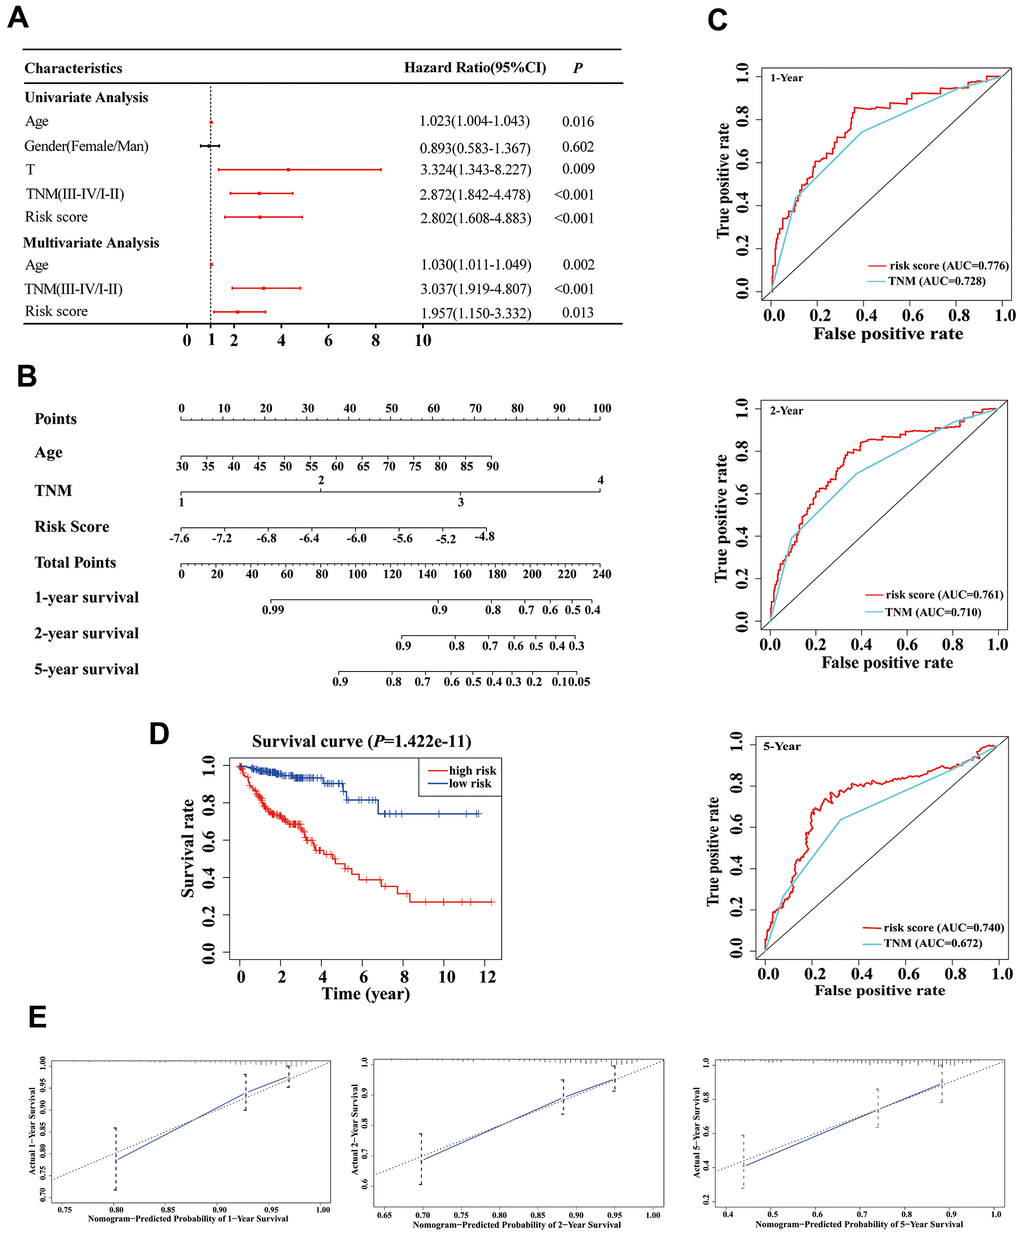 Establishment of an overall survival (OS) nomogram for colon adenocarcinoma (COAD) patients. (A) Univariate and multivariate analyses of risk score and clinical variables. Red solid dots represent significant difference, and black solid dots mean no difference. (B) A nomogram individually predicting OS in COAD patients. (C) The time-dependent ROC of our nomogram and TNM stage in the prediction of prognosis at 1-, 2-, and 5-year time points. (D) The K-M curve of our nomogram. (E) Calibration plot of the nomogram. The predicted and the actual probabilities of OS are plotted using blue solid and black dotted lines, respectively.